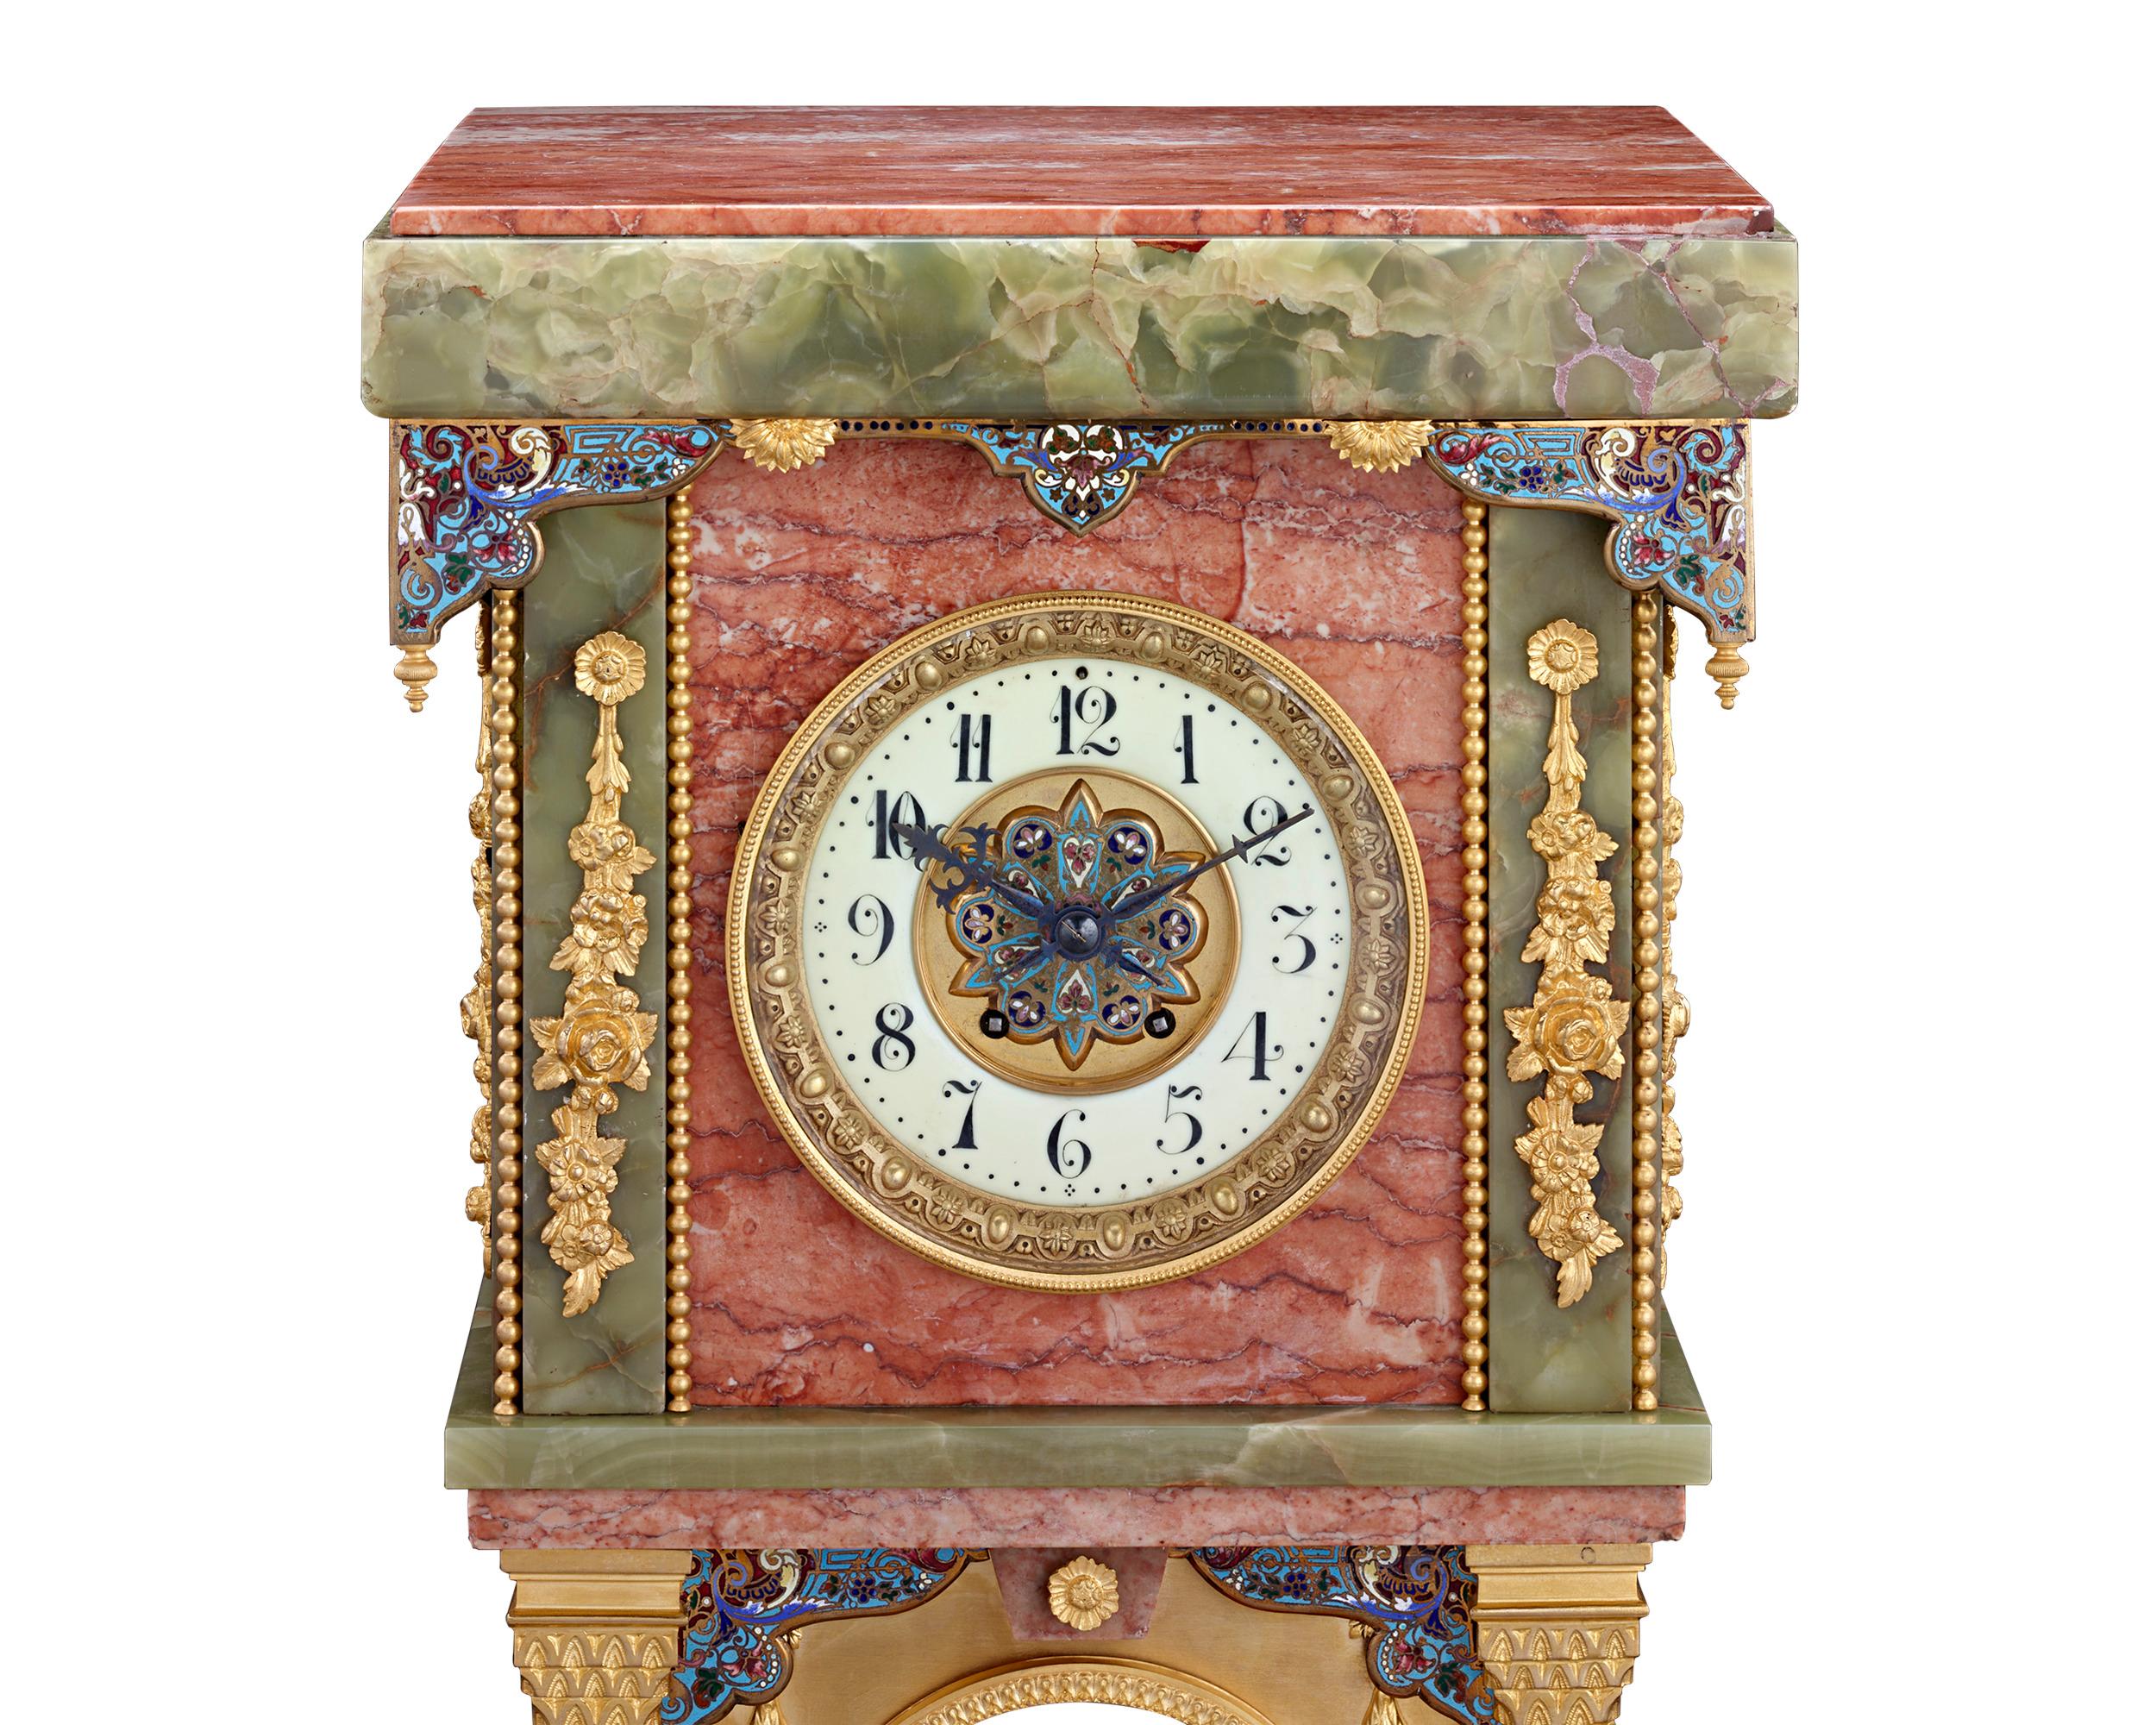 Carved French Marble, Onyx, Enamel and Ormolu Pedestal Clock